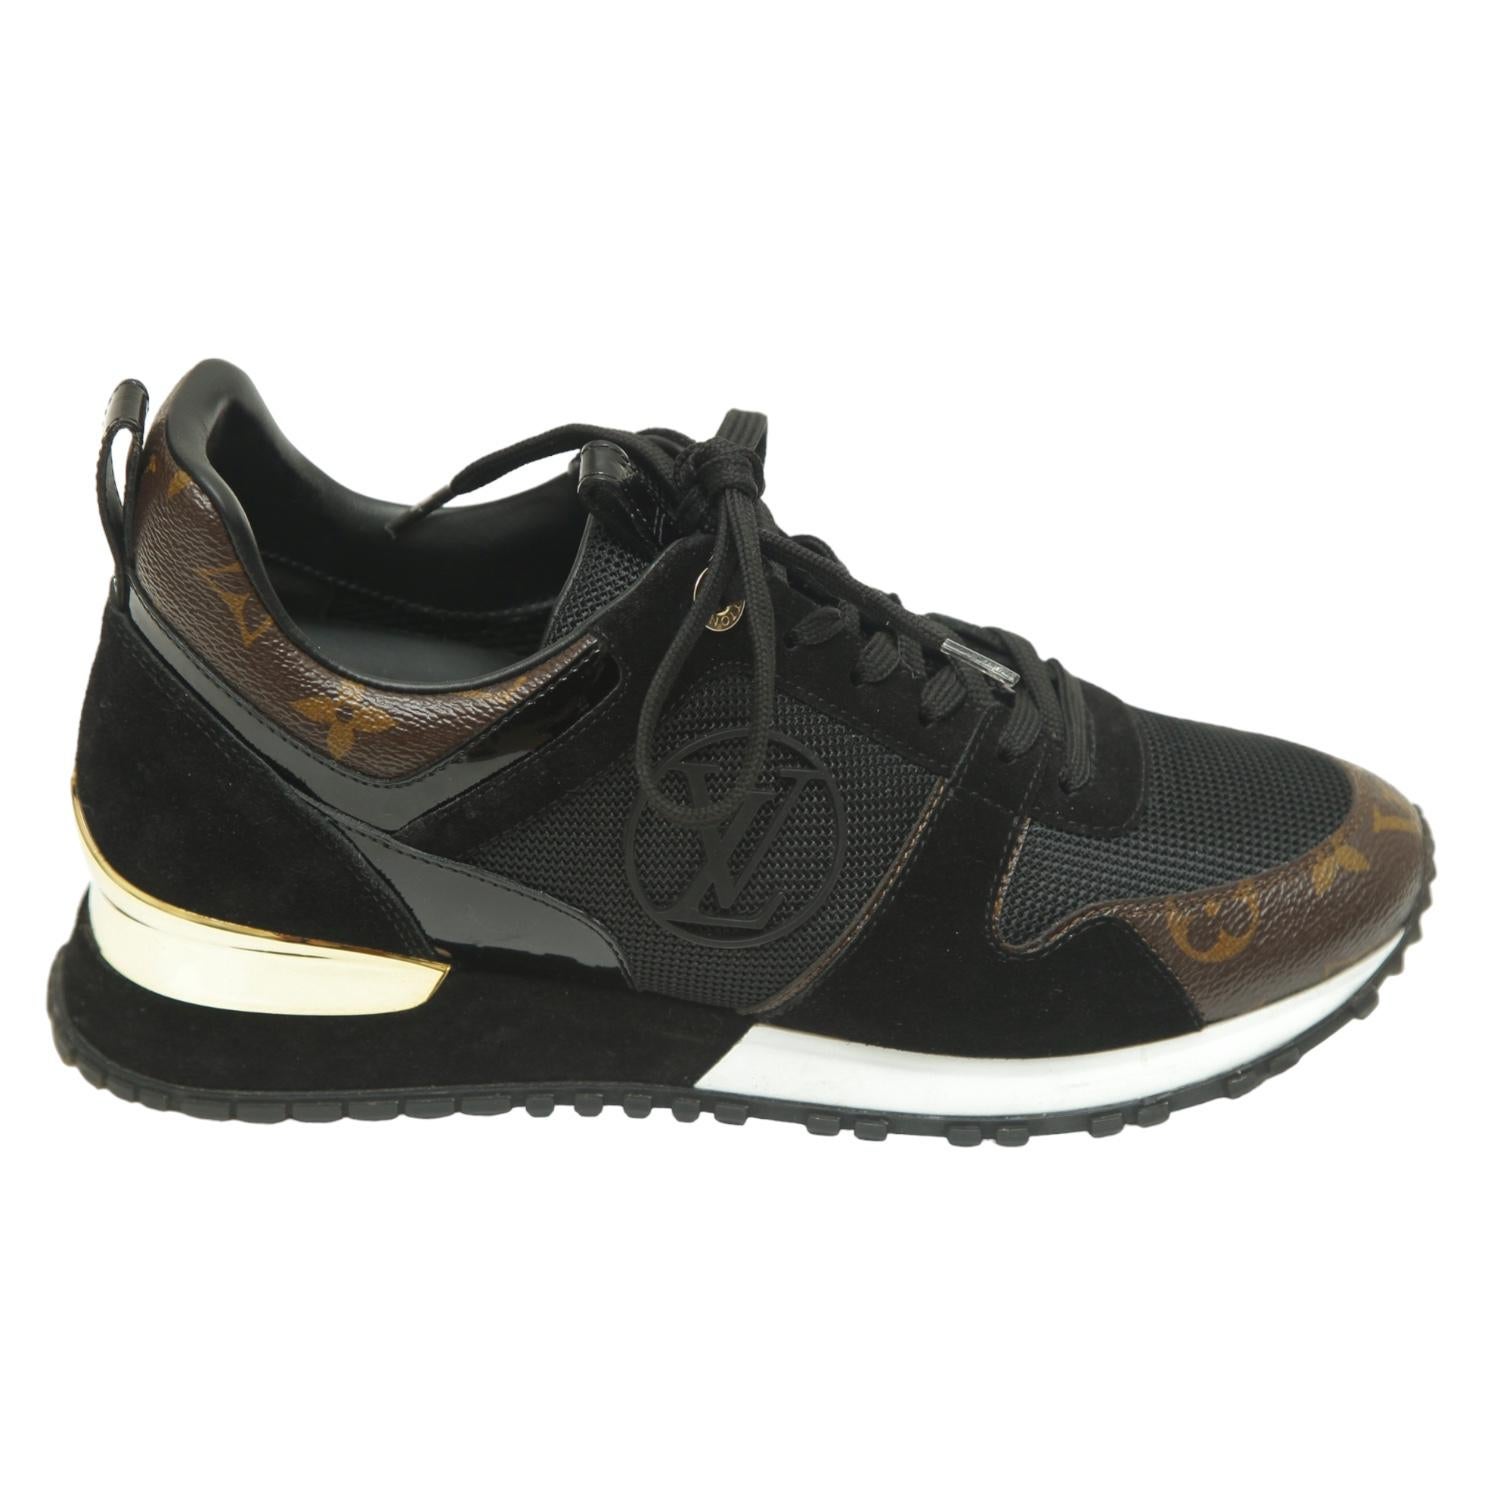 LOUIS VUITTON RUN AWAY SNEAKERS

Retail excluding sales taxes $1,160.

• Design:
   - Run Away style lace-up sneakers in black suede calfskin,
     black mesh and brown monogram canvas.
   - LV circle logo at sides.
   - Gold hardware accent.
   -